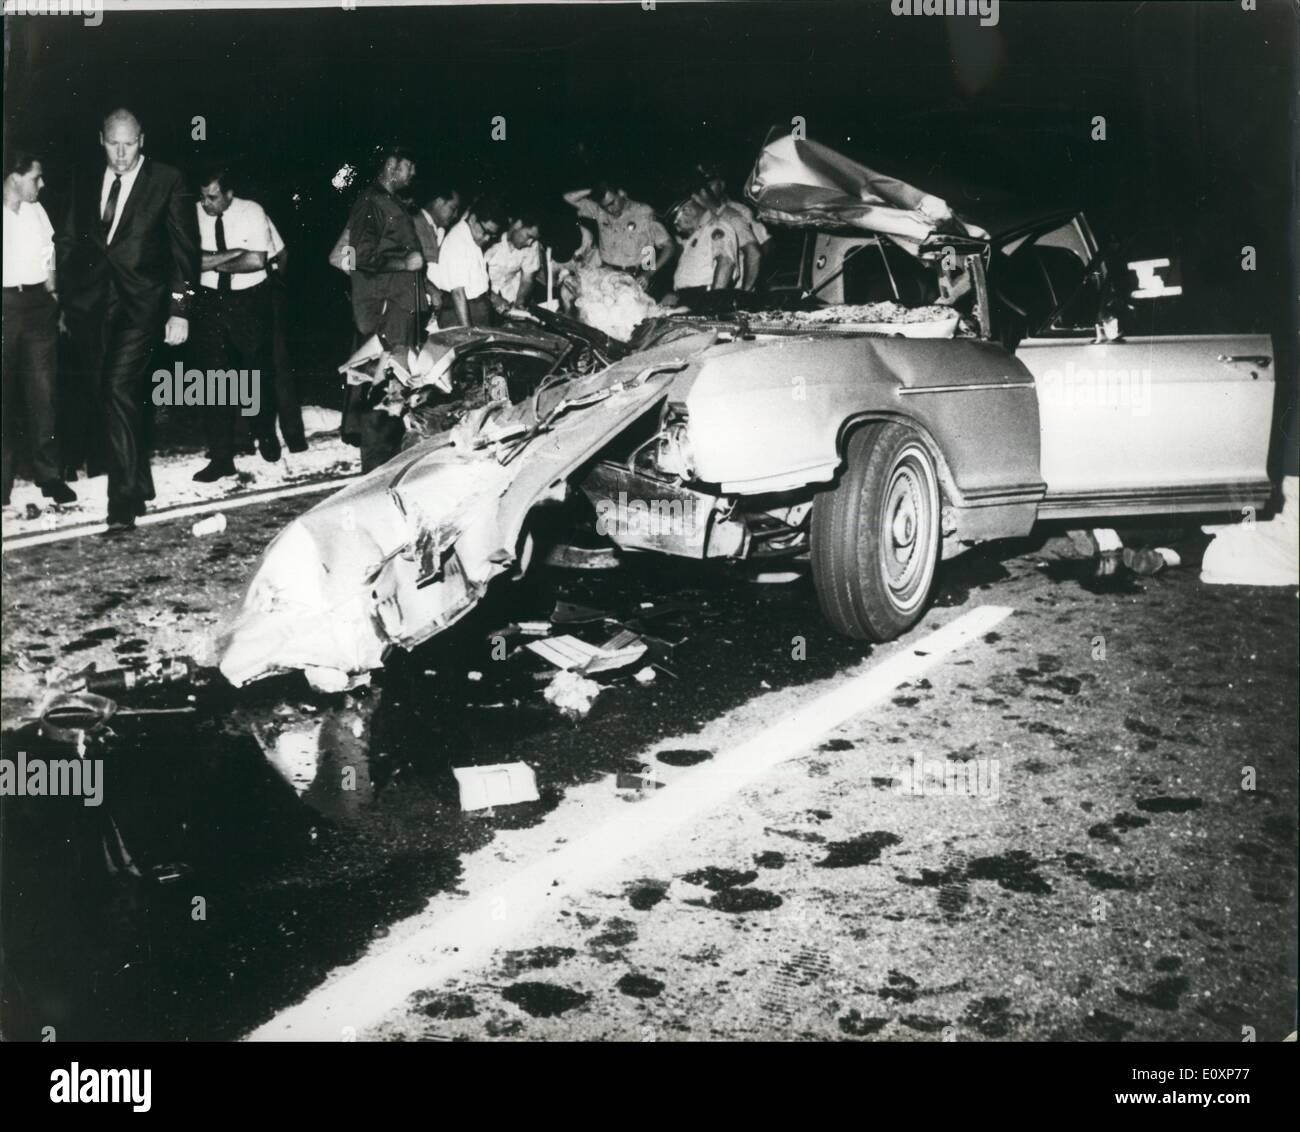 Jayne Mansfield Crash Scene Photos Images And Photos Finder